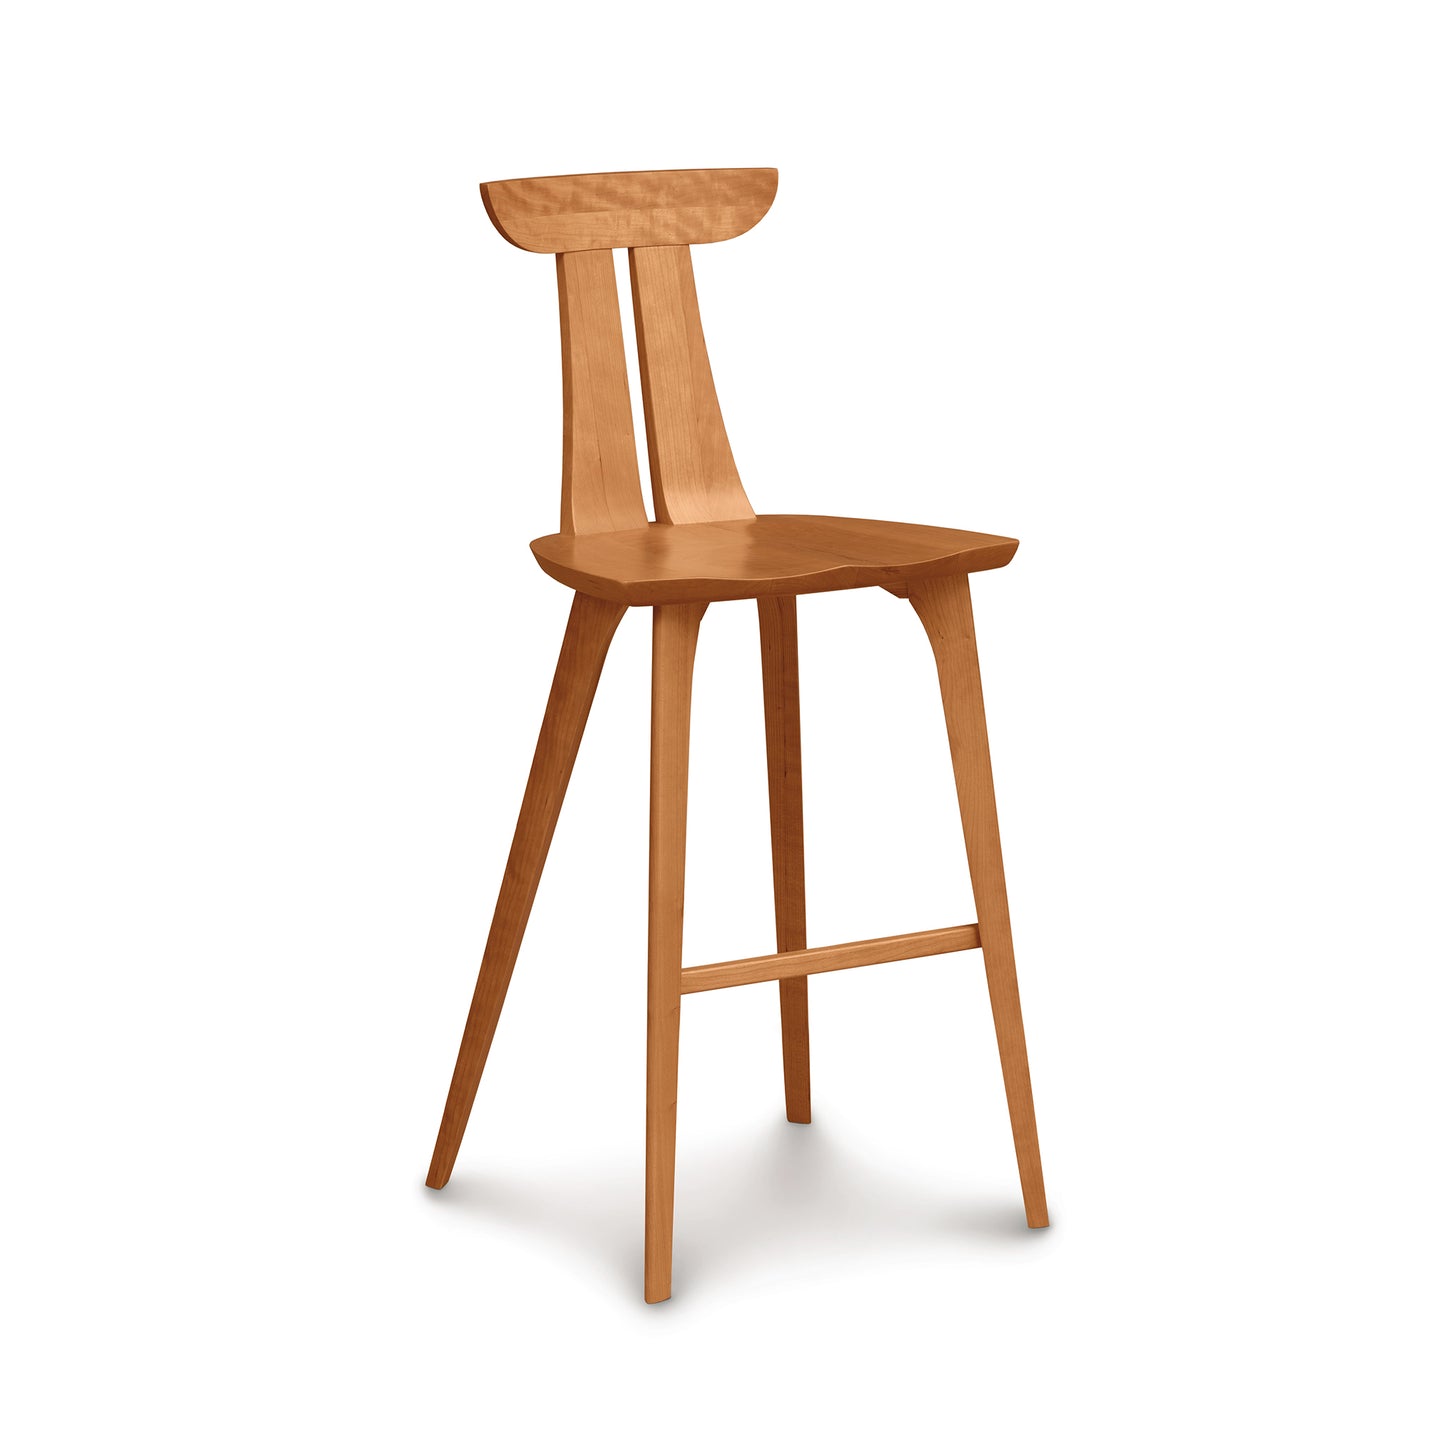 A solid Estelle Bar Stool from Copeland Furniture isolated on a white background.